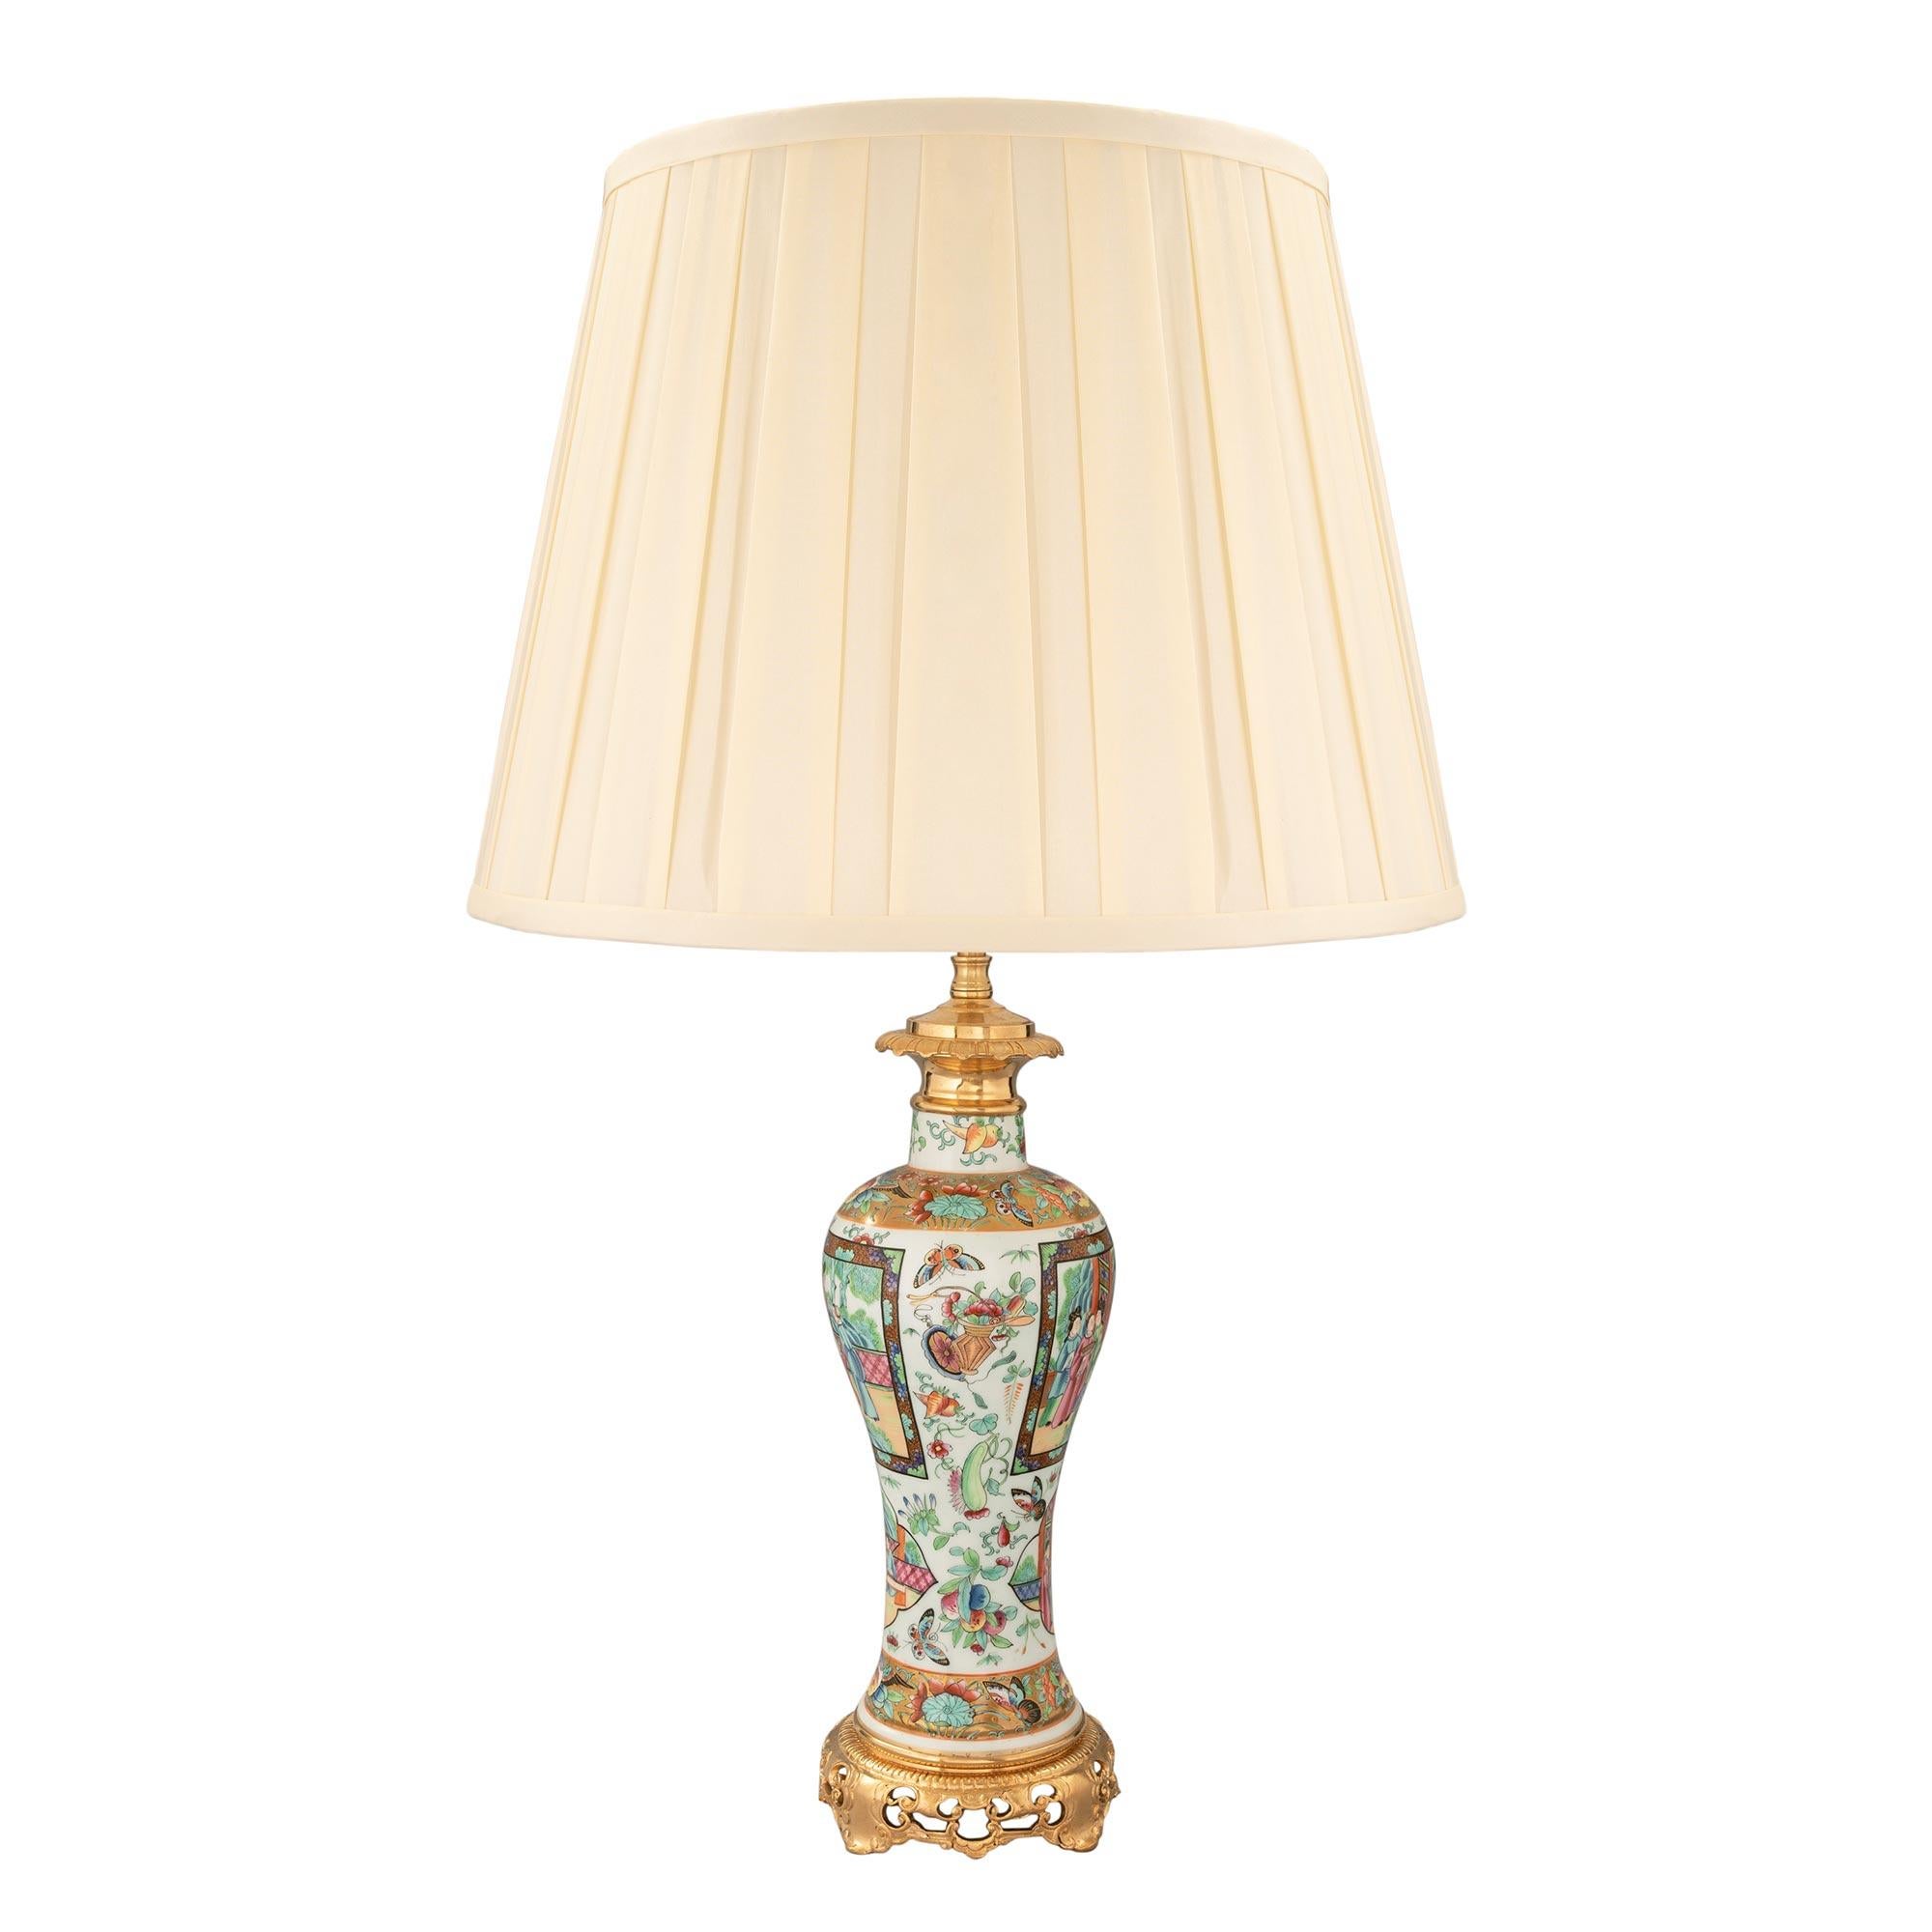 A beautiful pair of 19th century Chinese export porcelain lamps decorated with 19th century French Louis XVI st. ormolu mounts. Each lamp is raised by a beautiful pierced foliate ormolu base with a fine wrap around band. The elegantly shaped